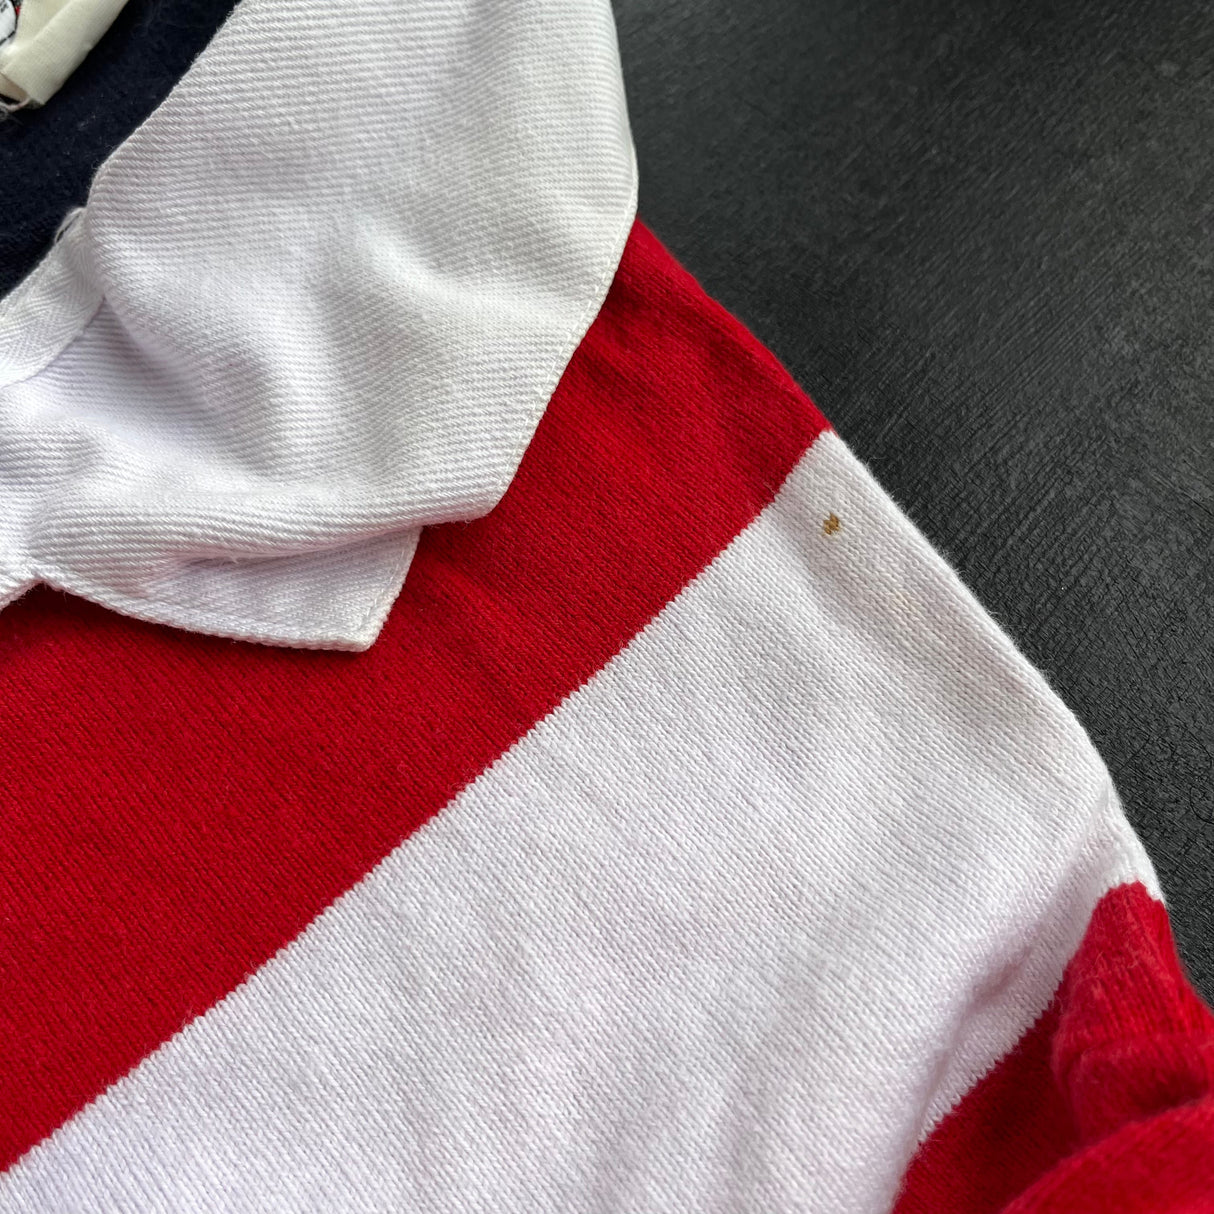 USA National Rugby Team Jersey 1990's Large Underdog Rugby - The Tier 2 Rugby Shop 